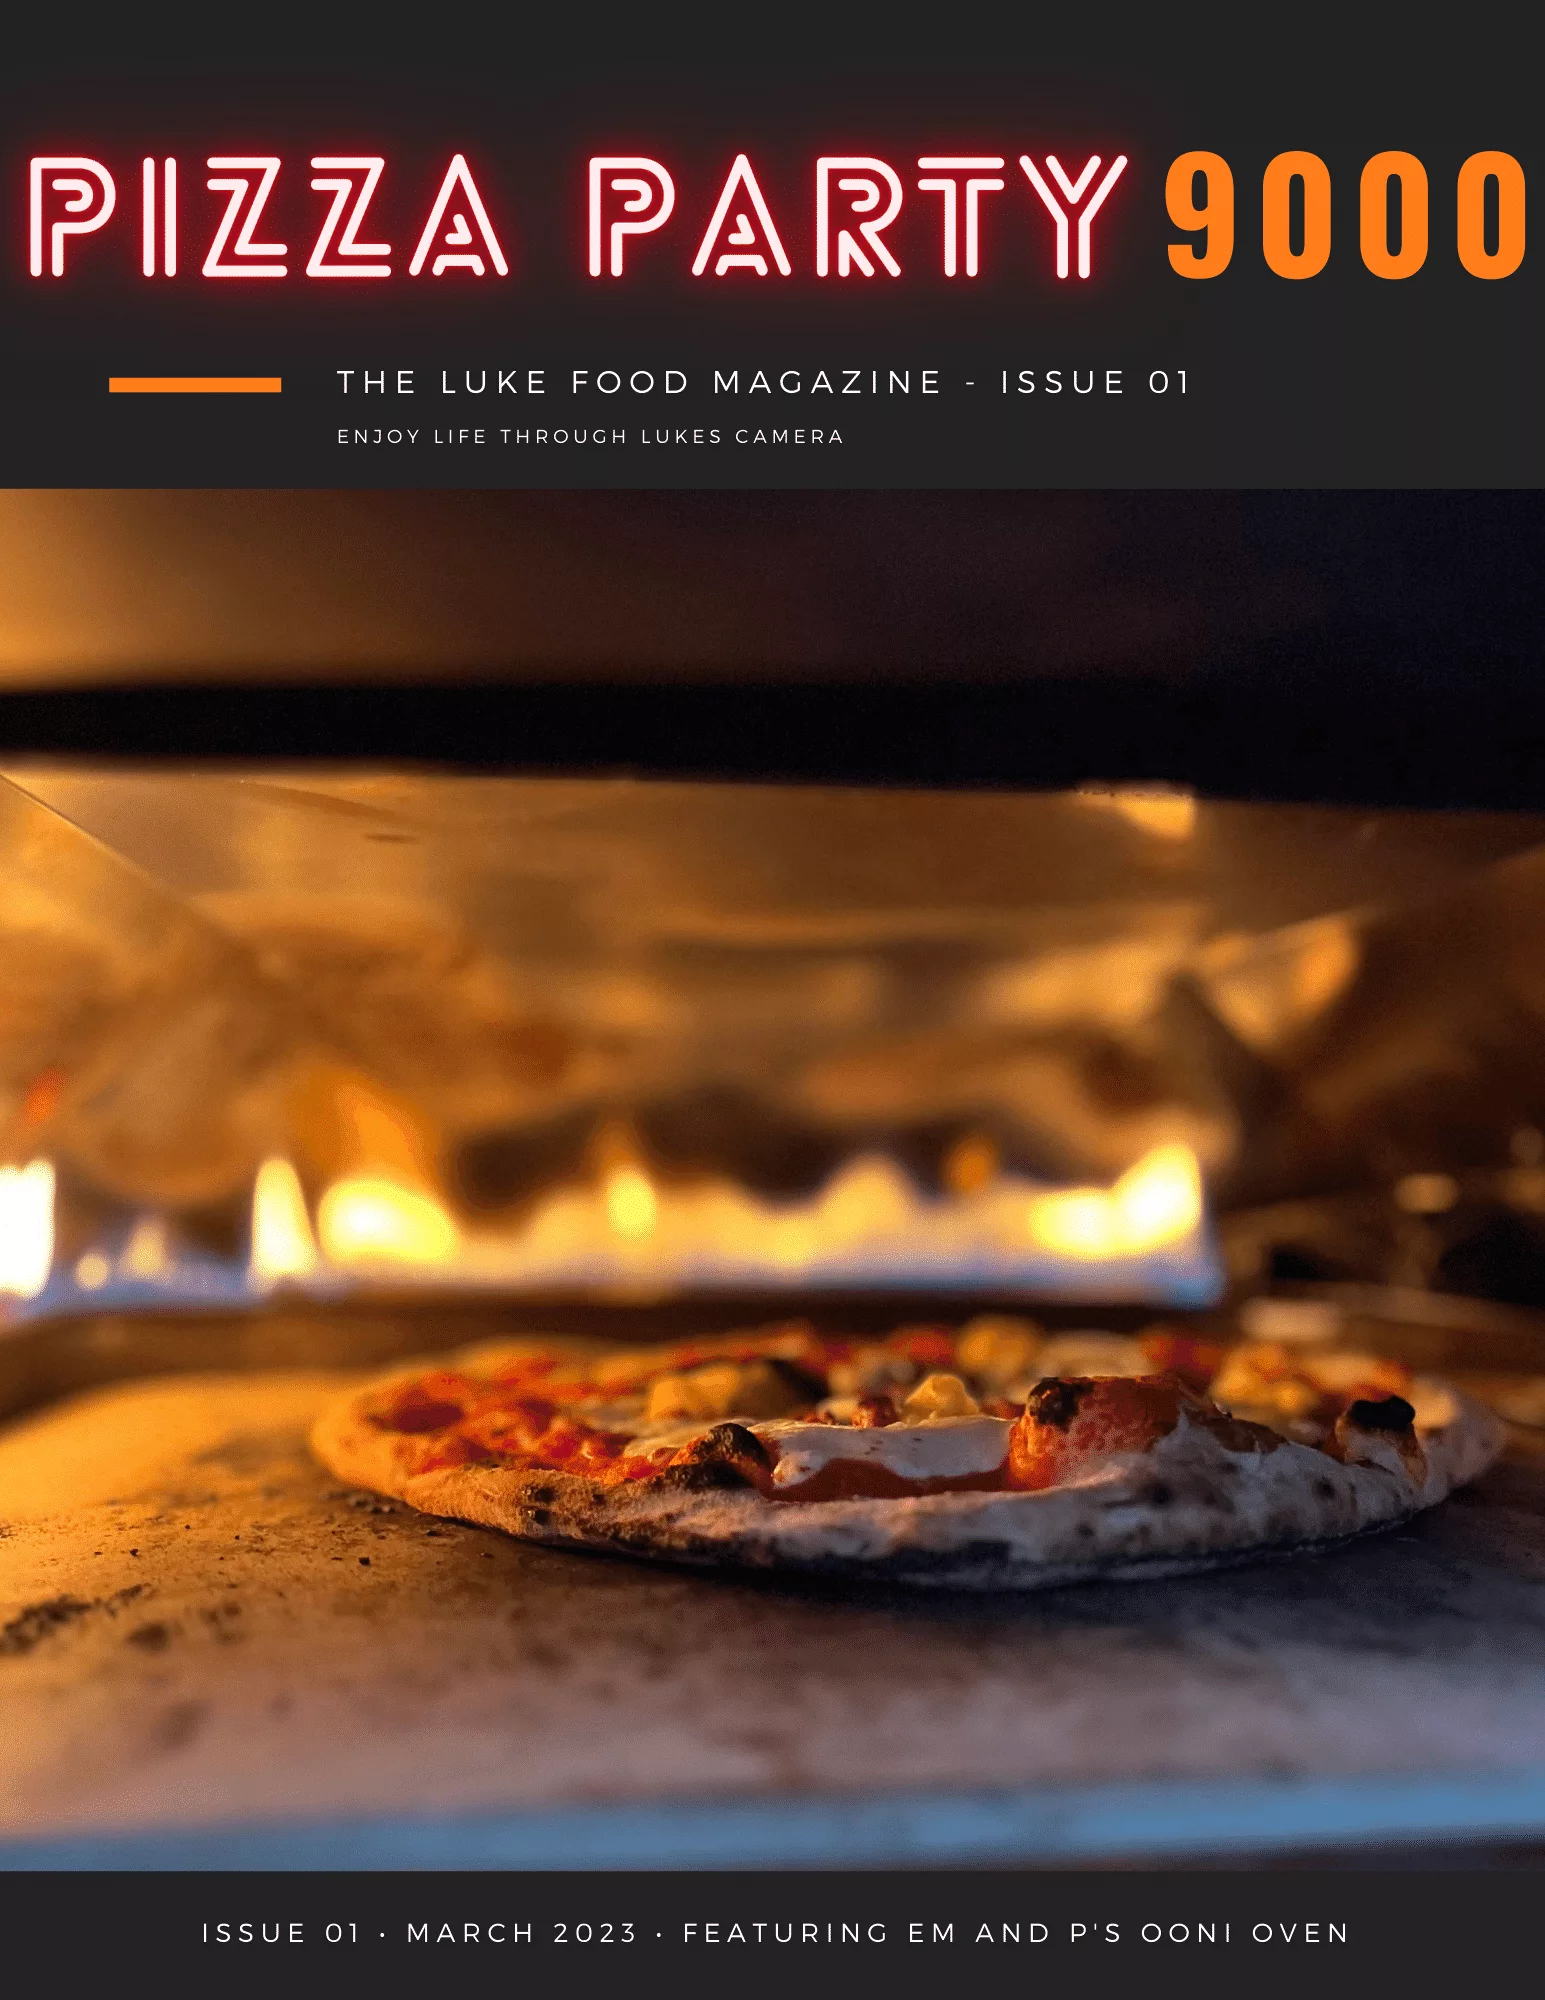 Pizza Party 9000: A Celebration of Crust, Cheese, and Toppings Galore 🍕🍕🍕🍕